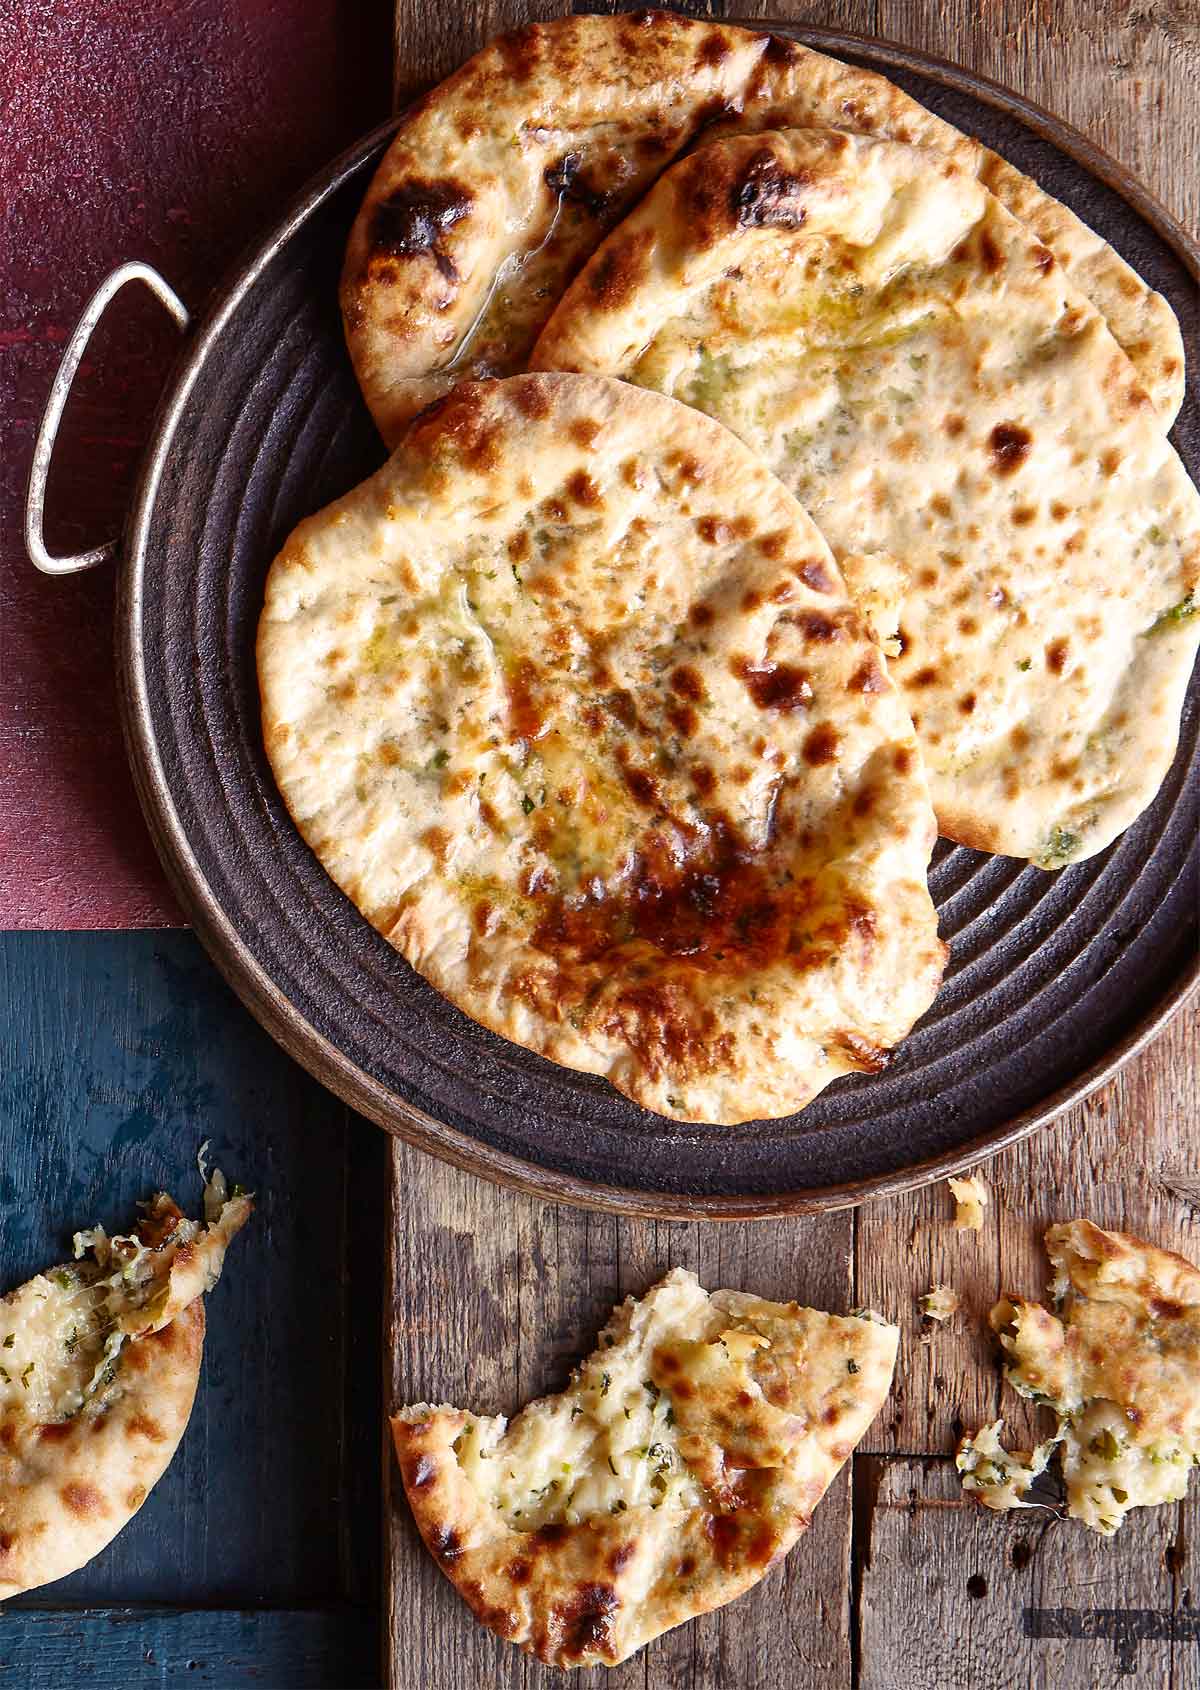 Three cheese and chile naan bread, drizzled with butter, in a metal dish on a wooden table, beside pieces of naan.